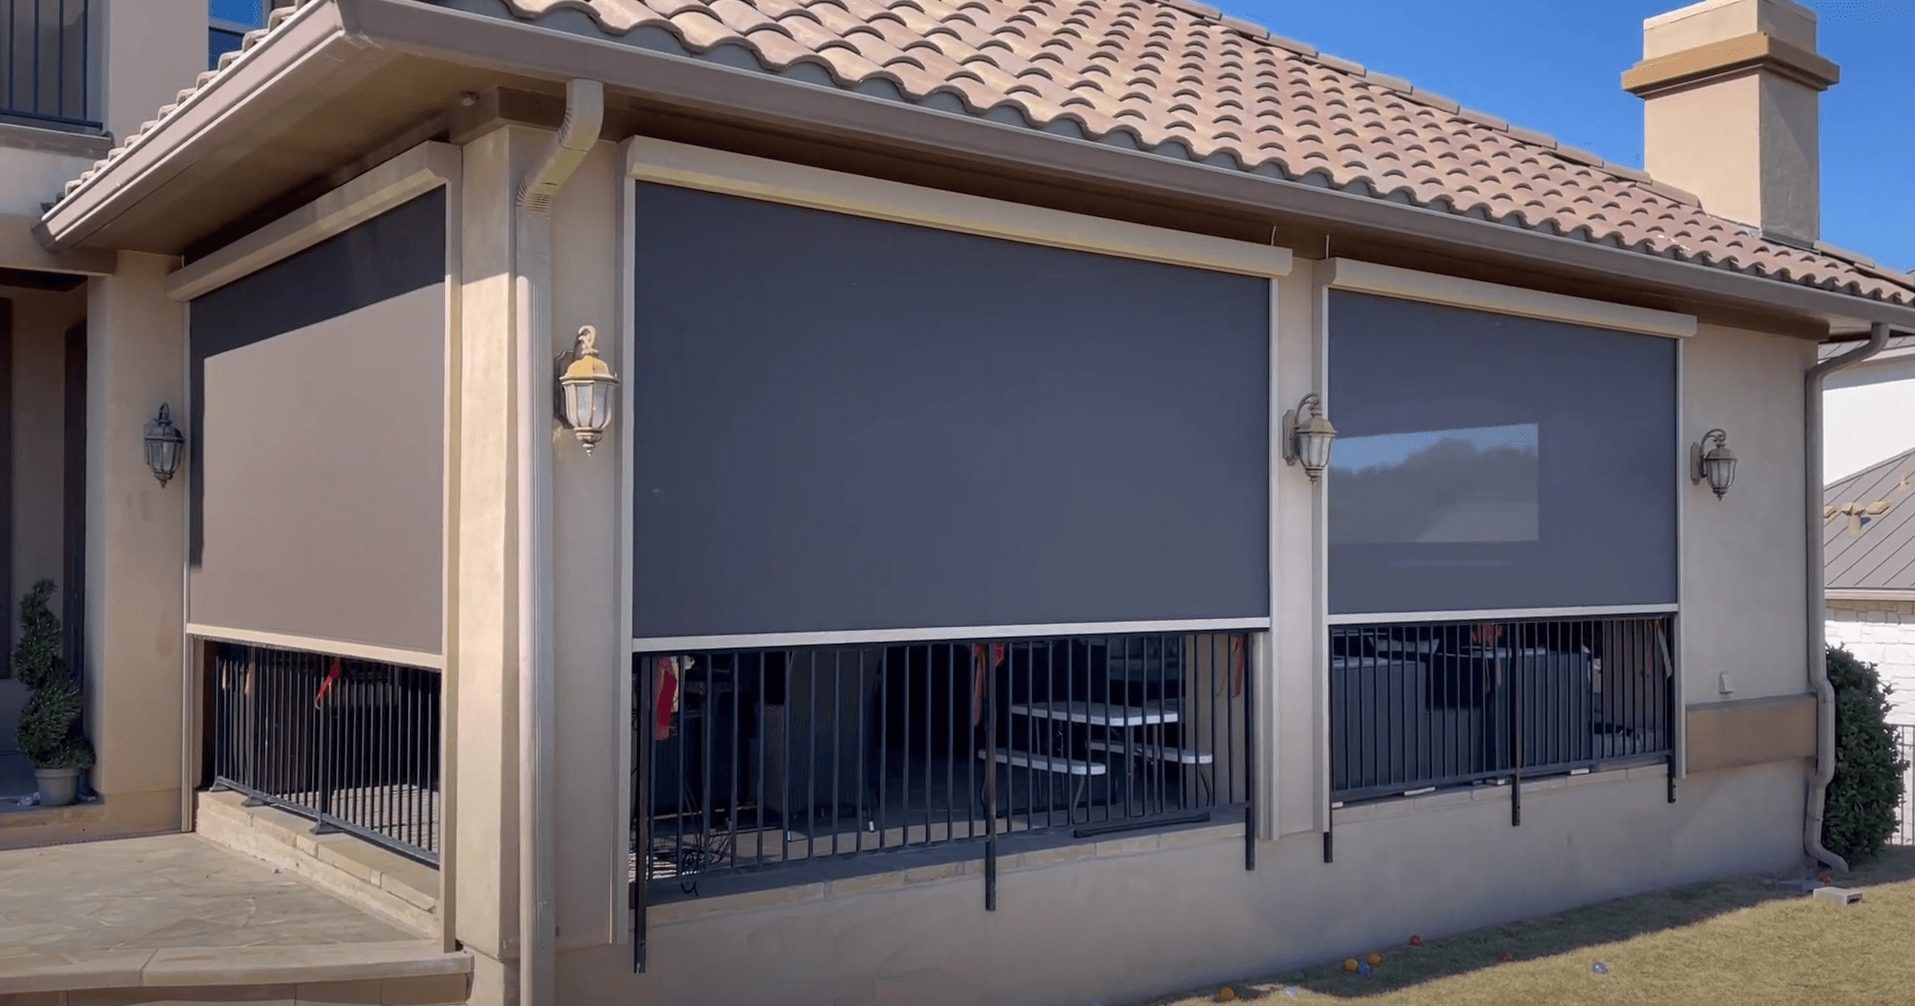 6 Reasons Why You Want Motorized Screens for Your Patio